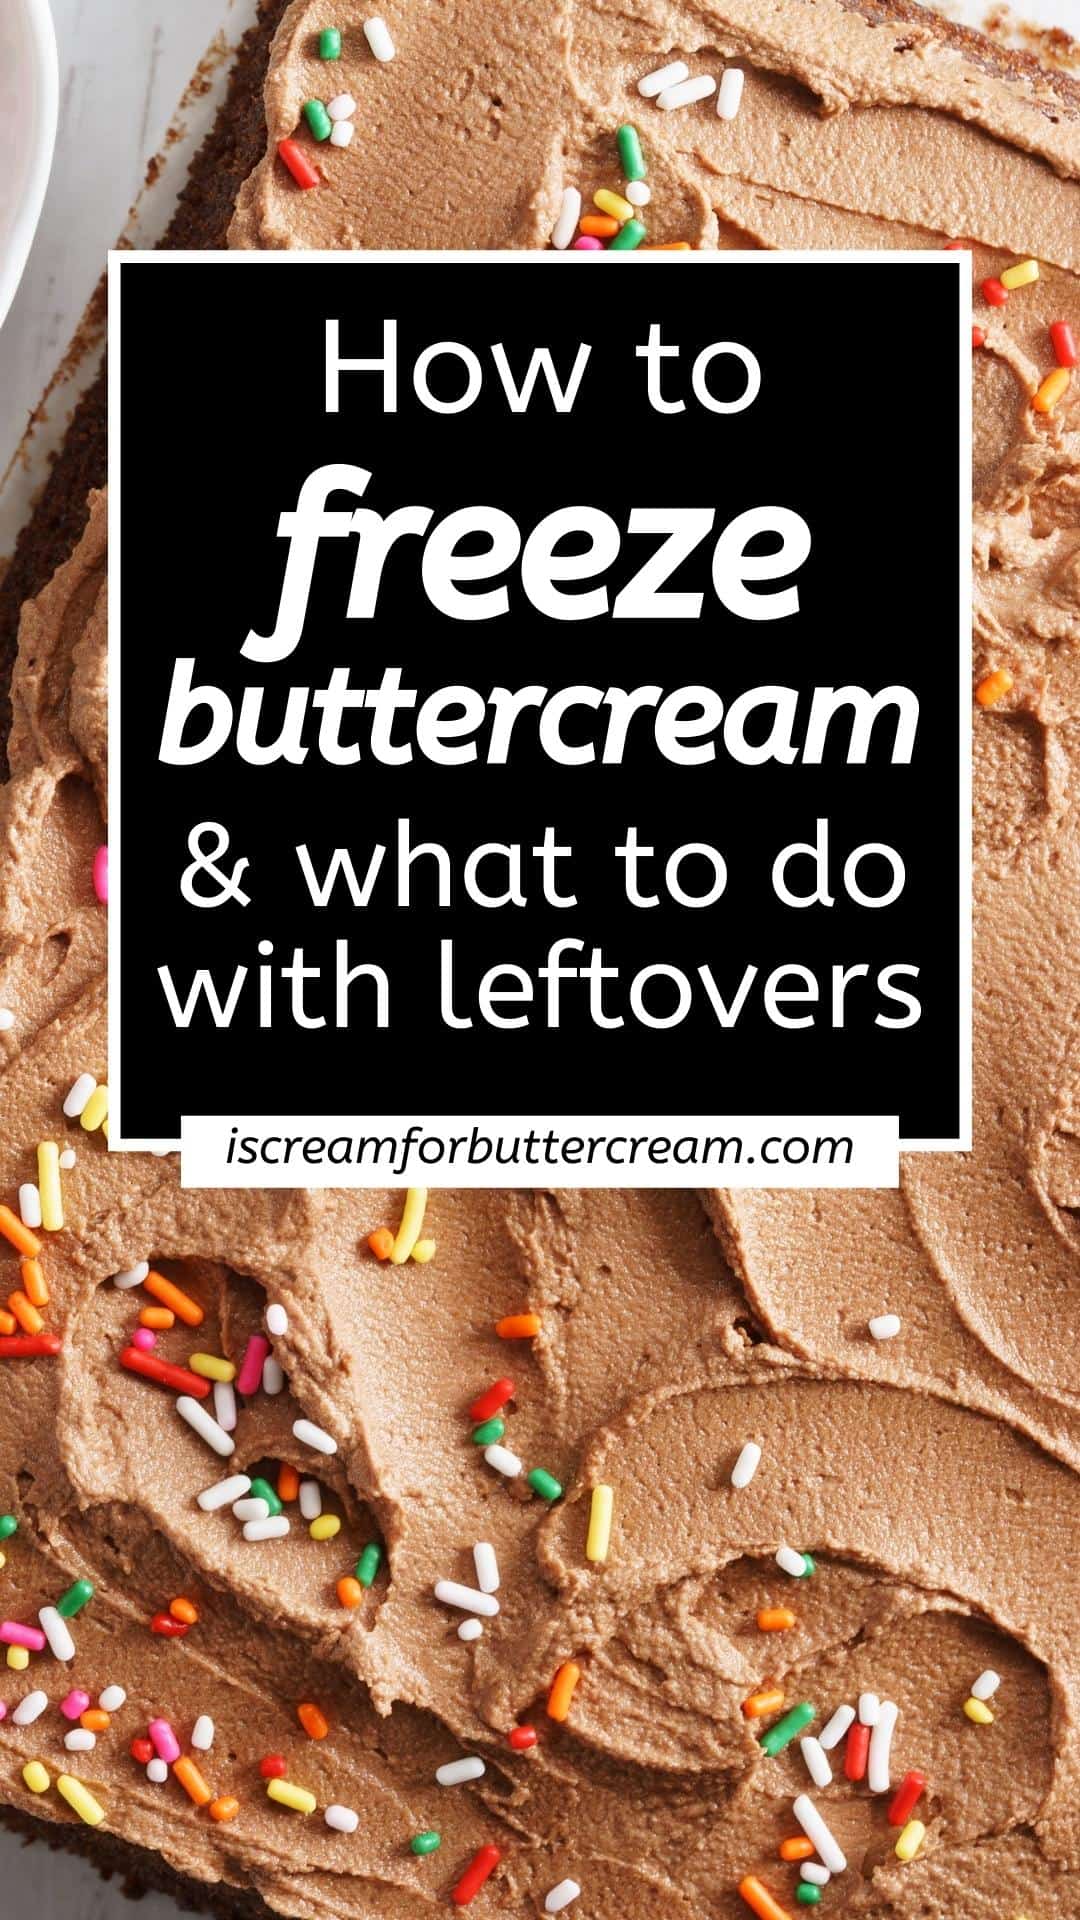 Chocolate frosting with sprinkles and text overlay.